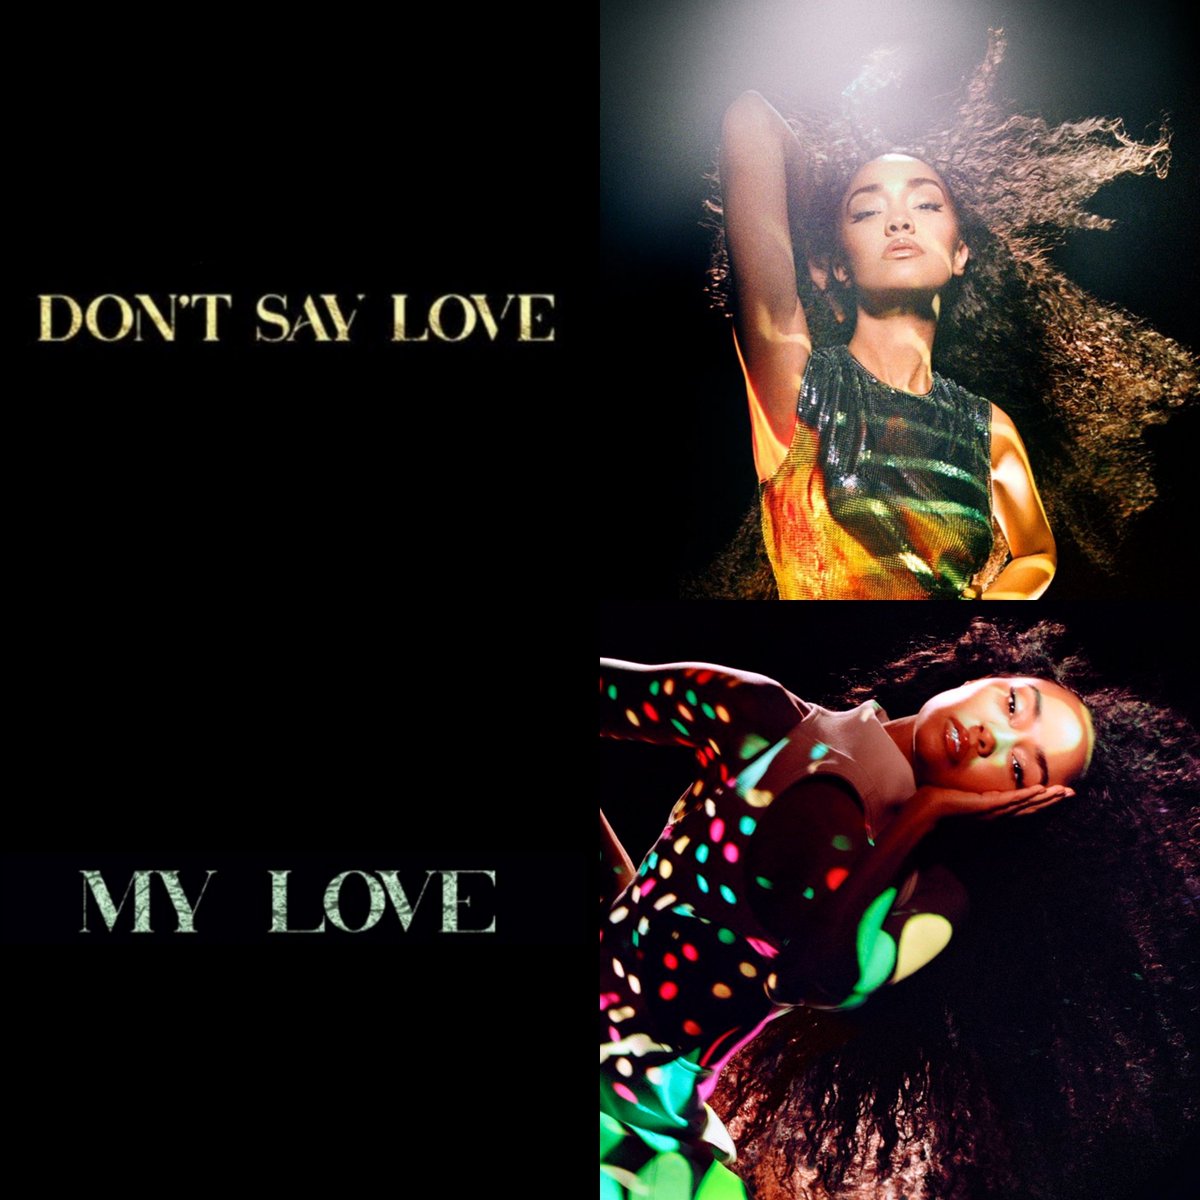 Which single is your favorite from Leigh-Anne?